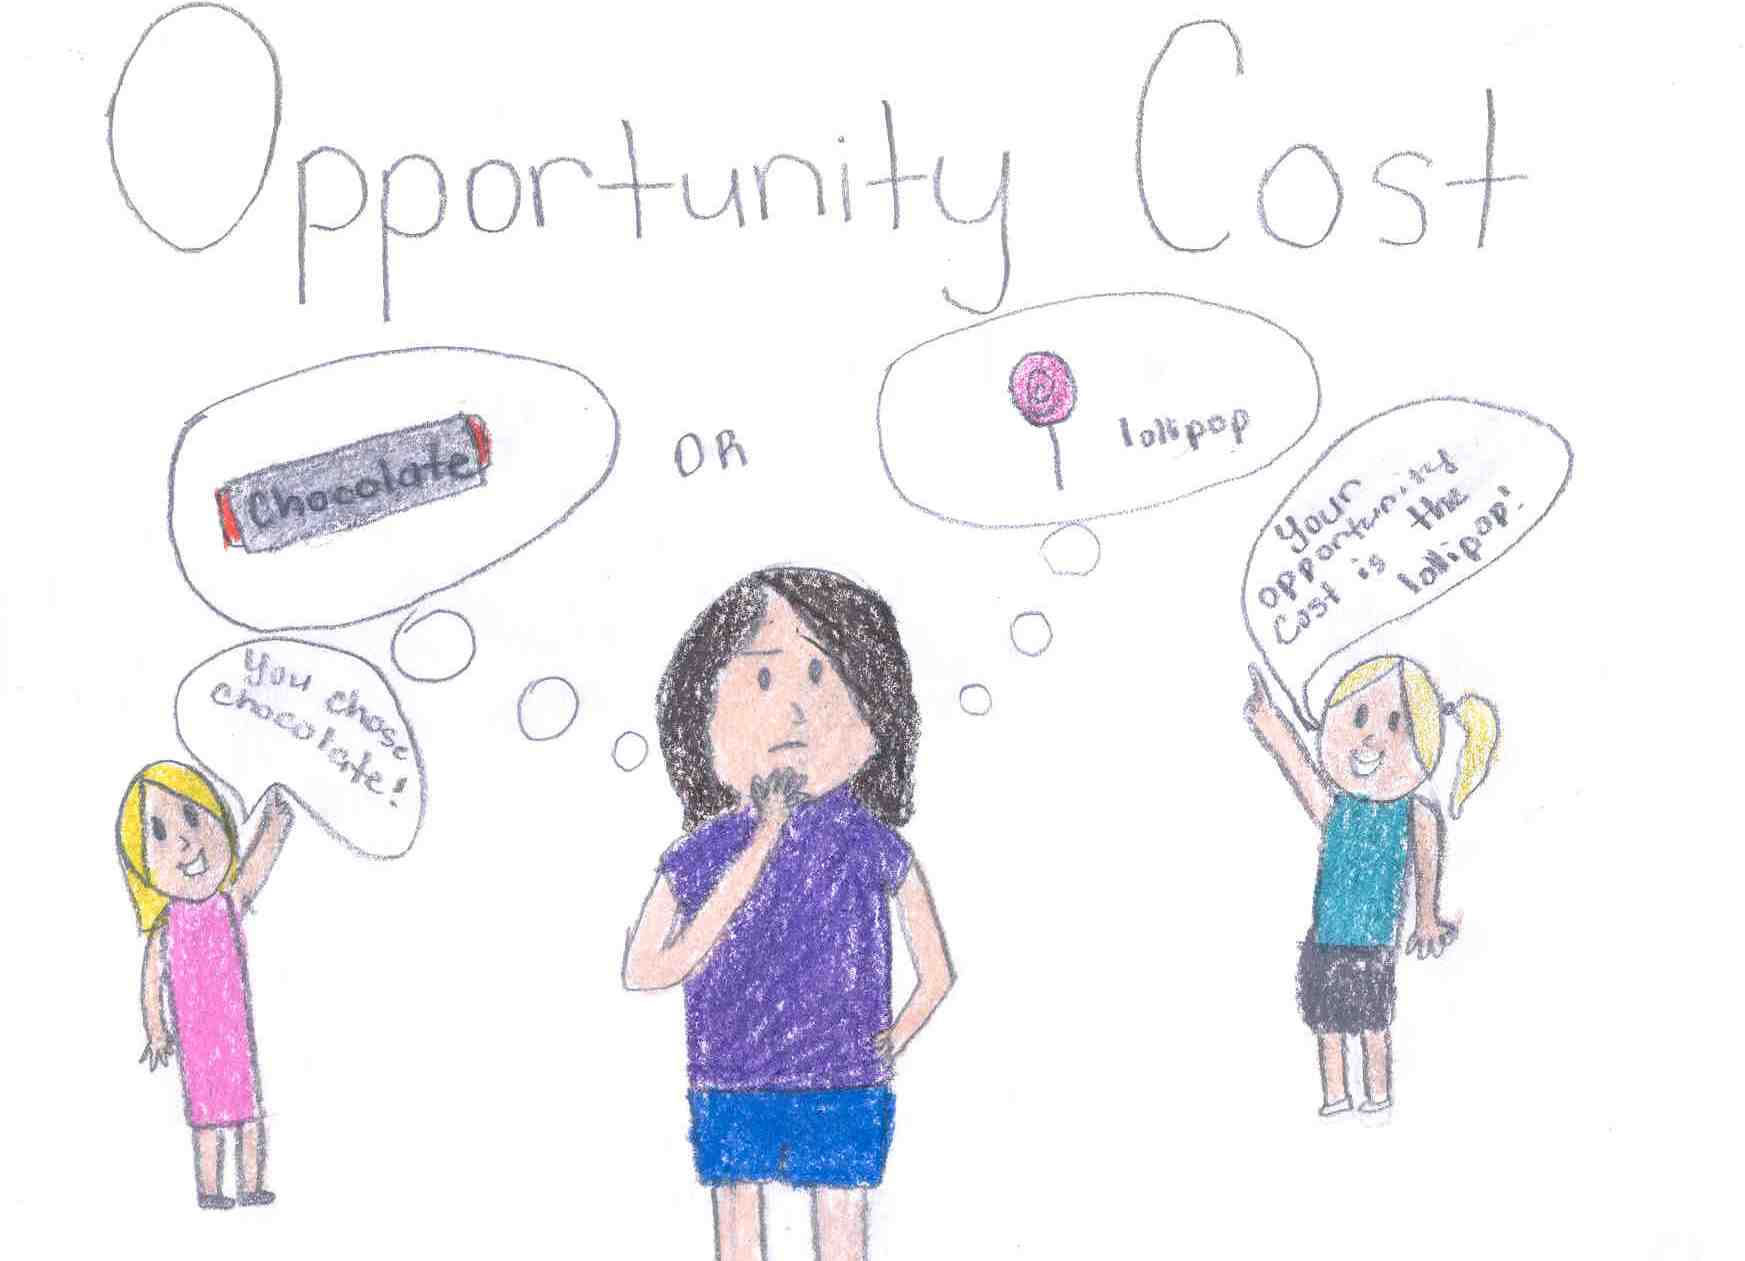 OpportunityCost